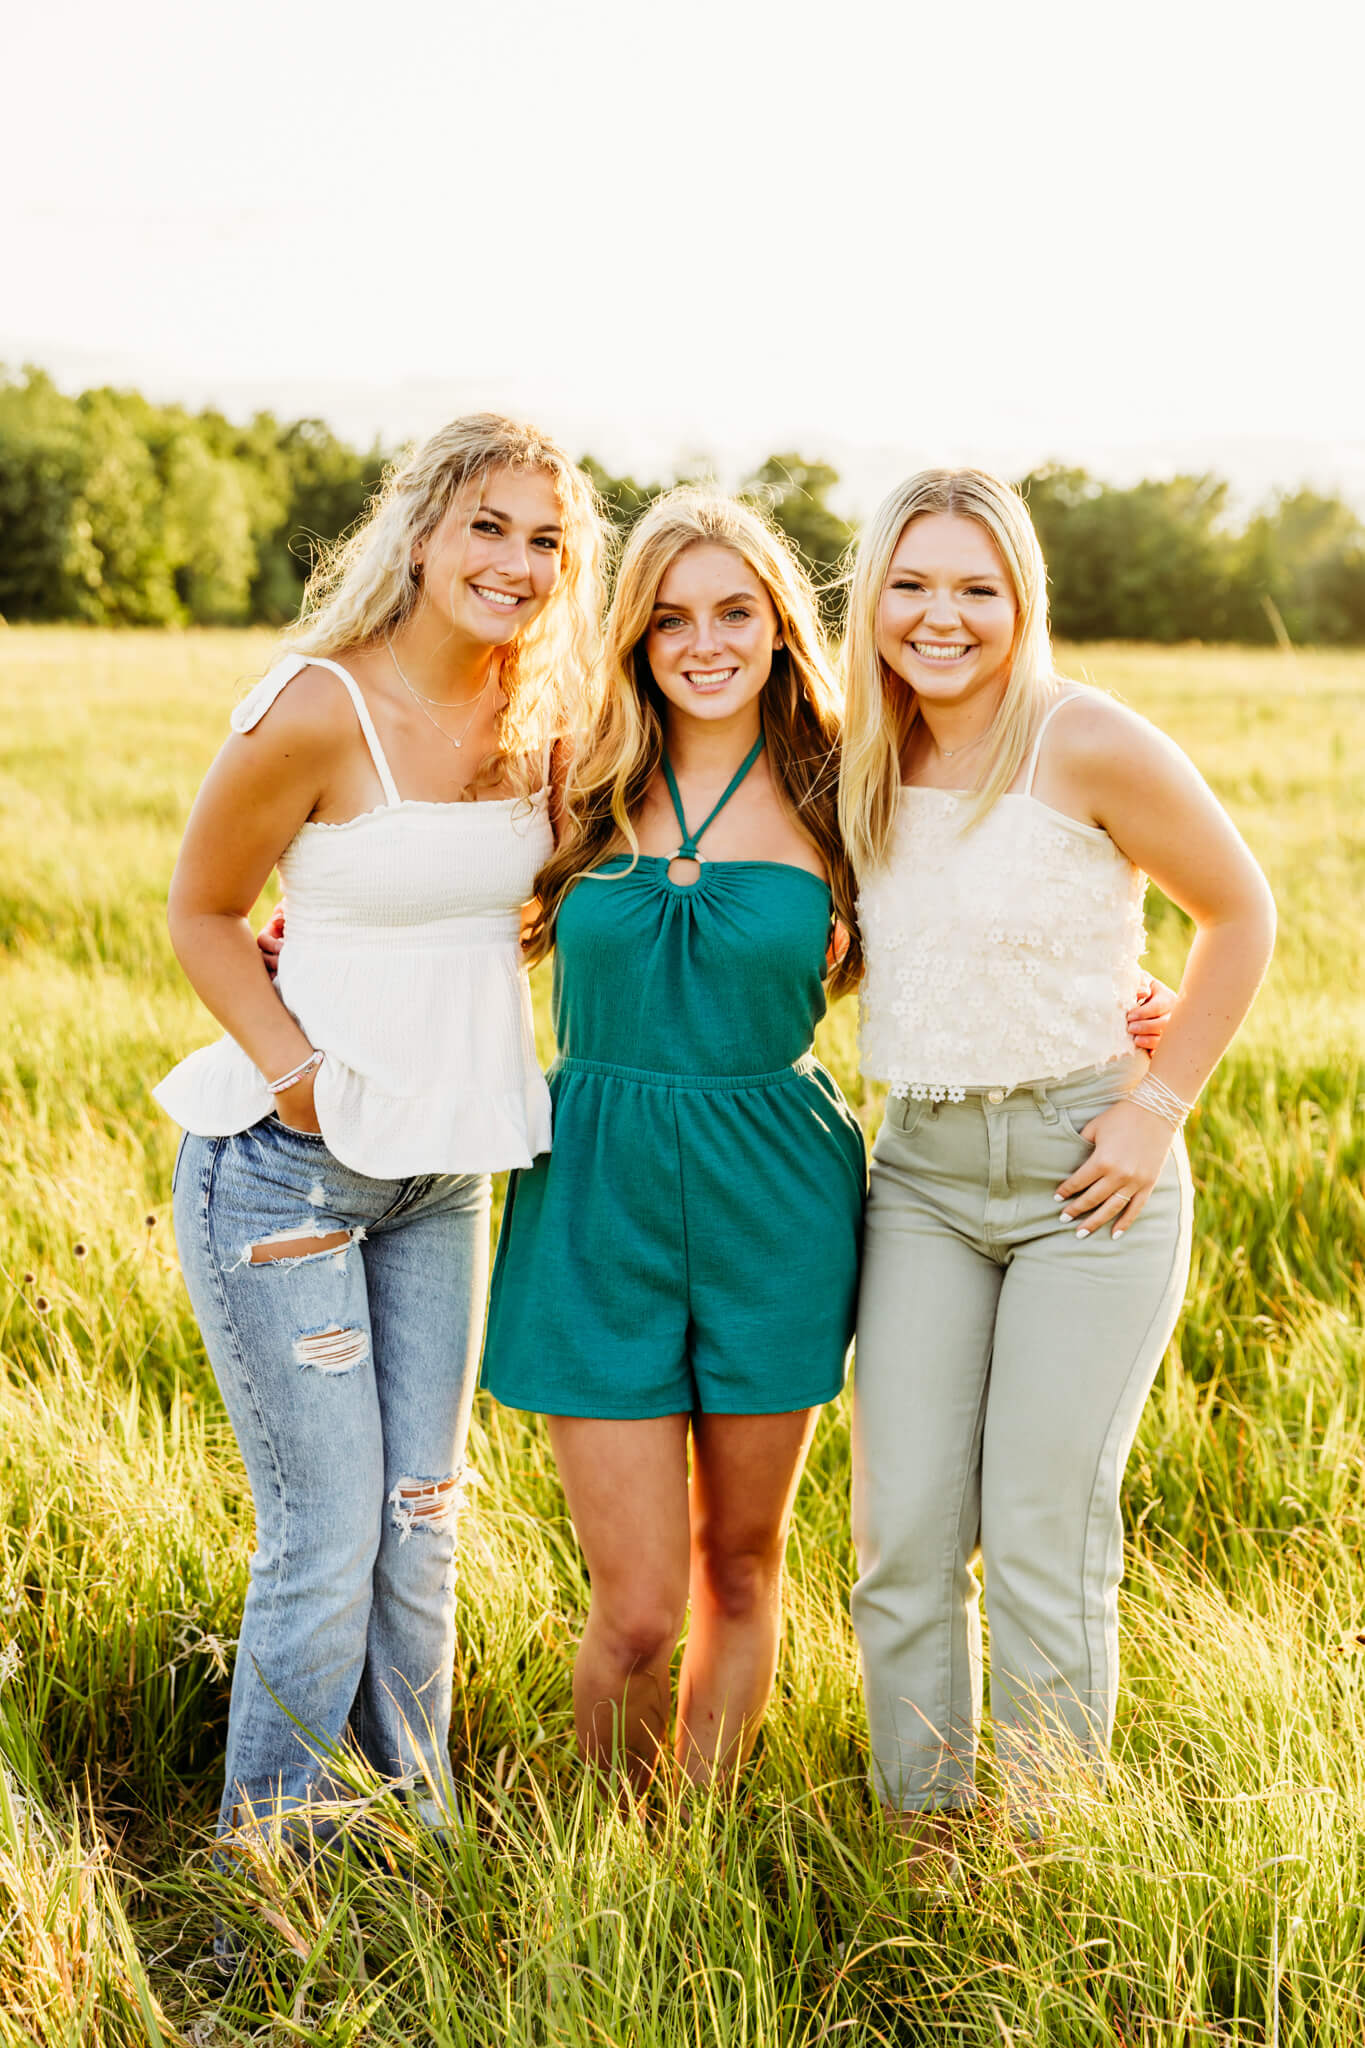 three teens smiling and hugging each other in a grassy field at sunset